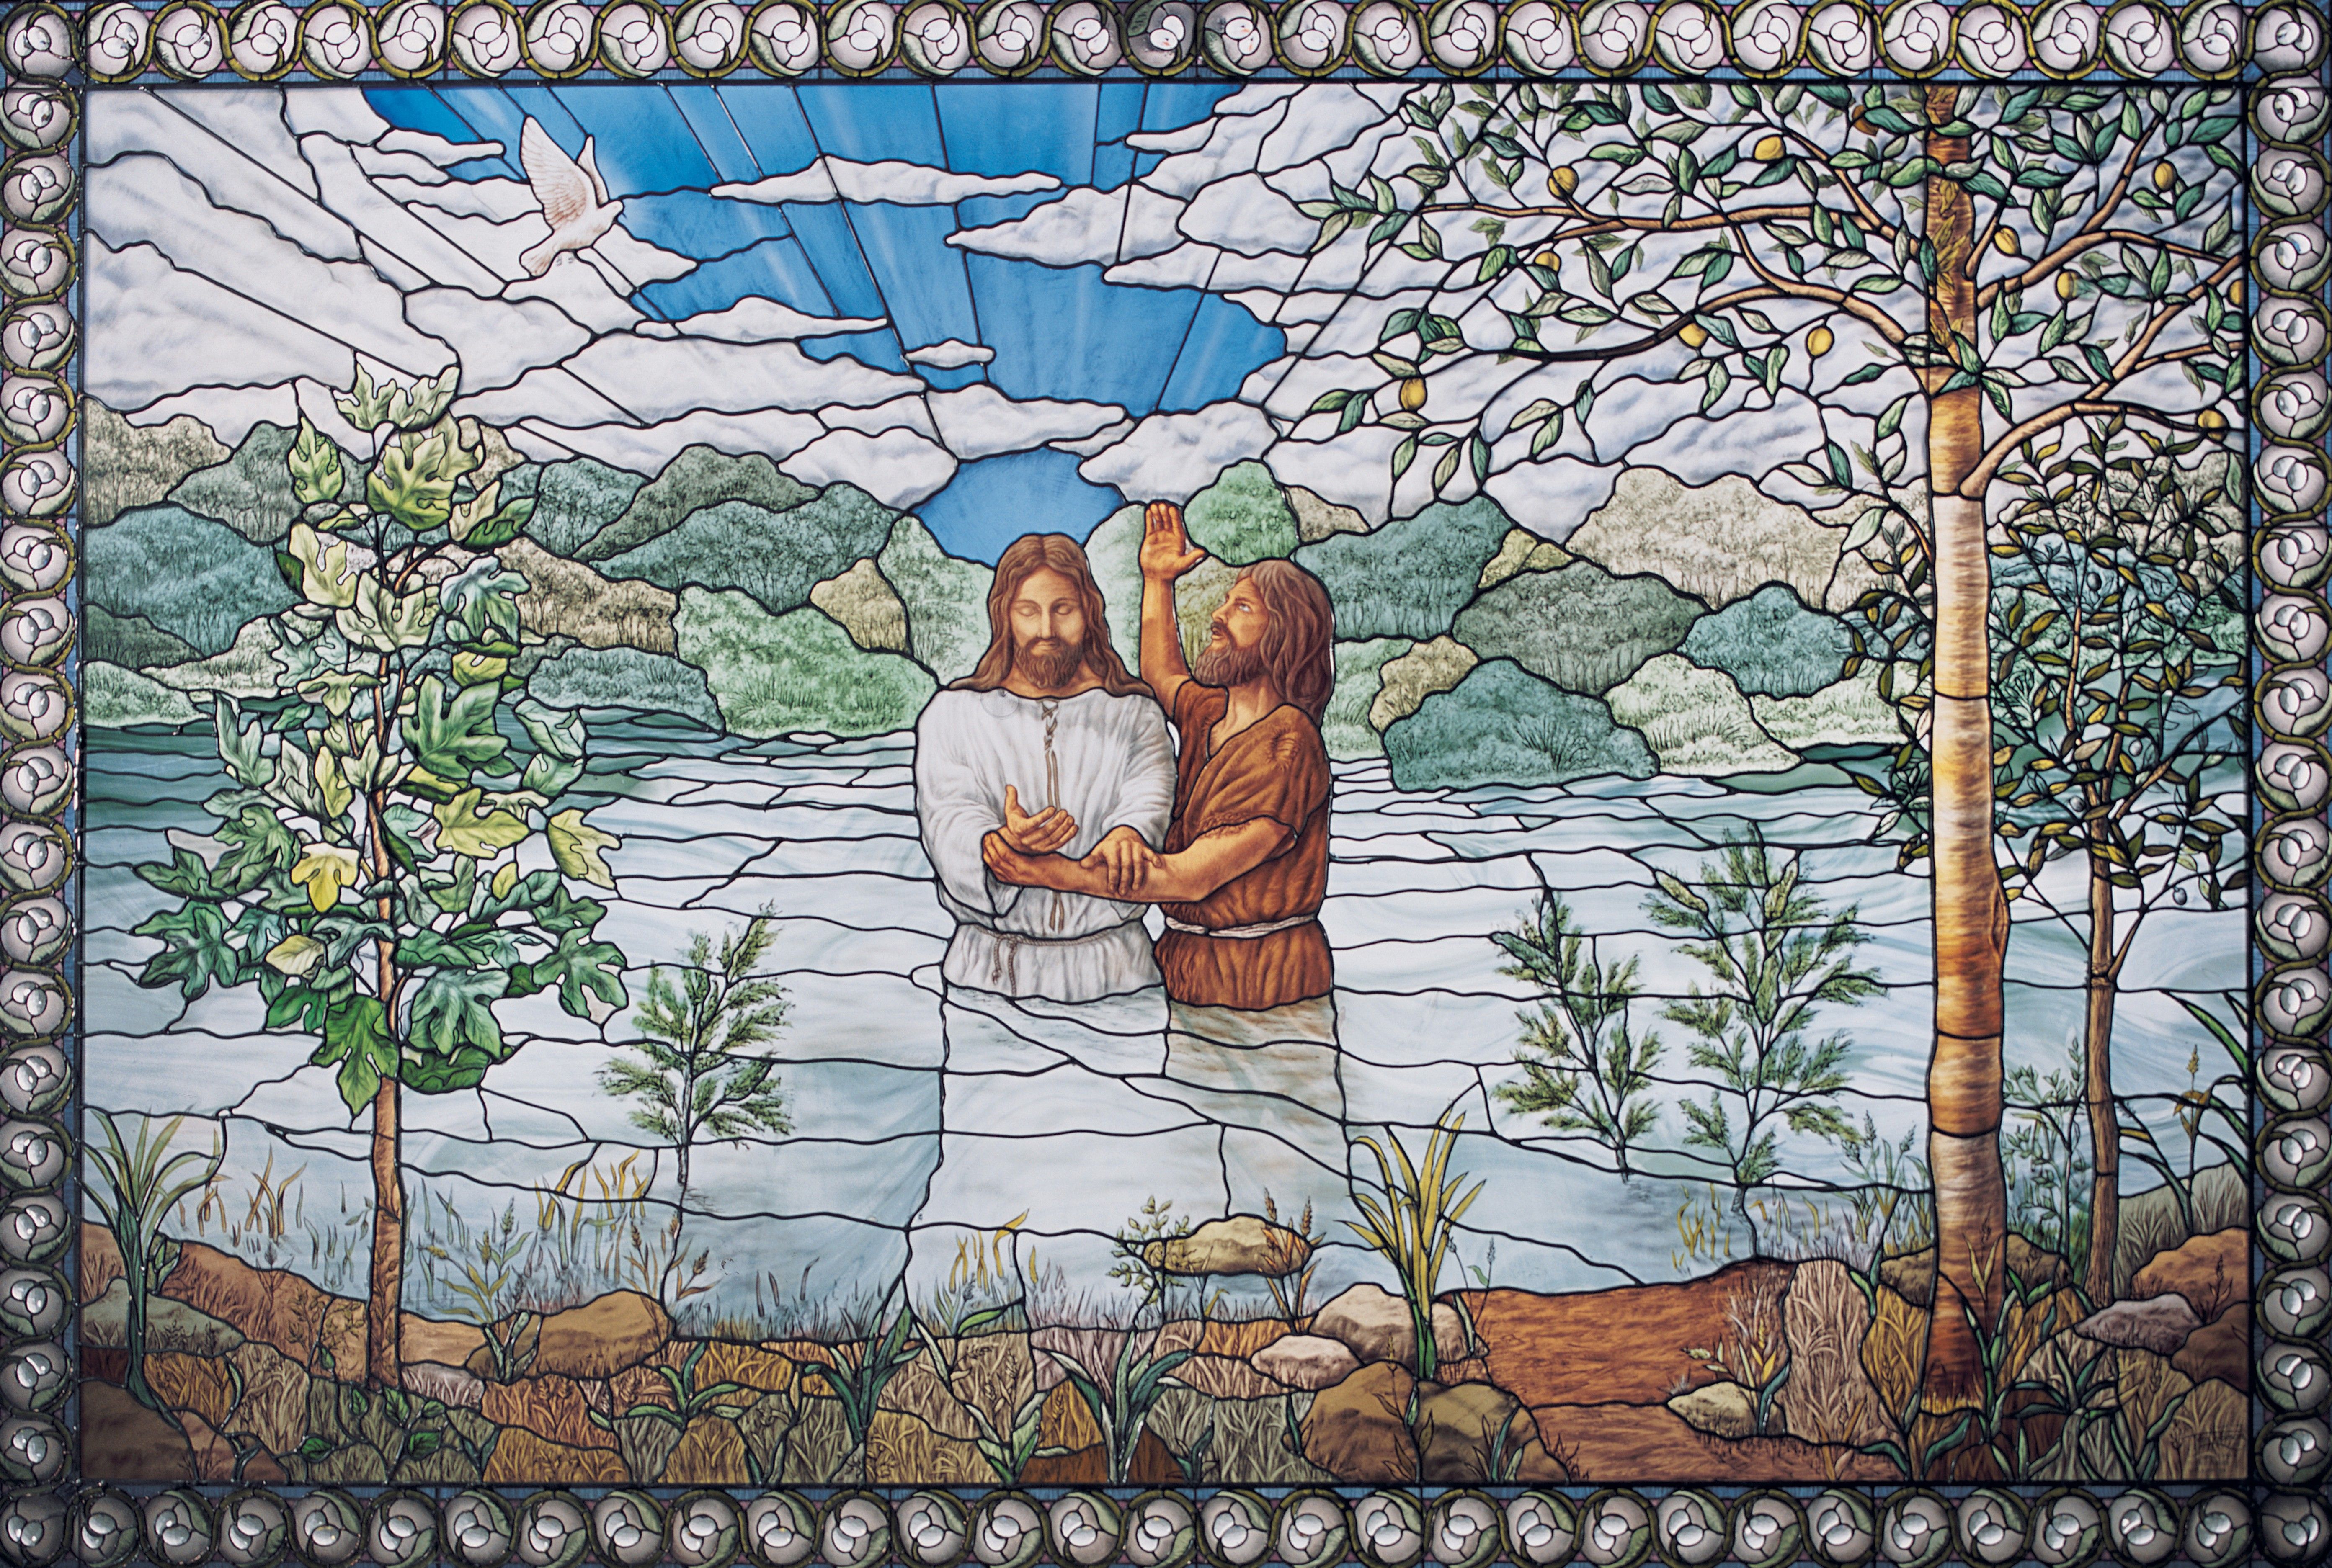 A stained glass window depicting Jesus Christ being baptized by John the Baptist.